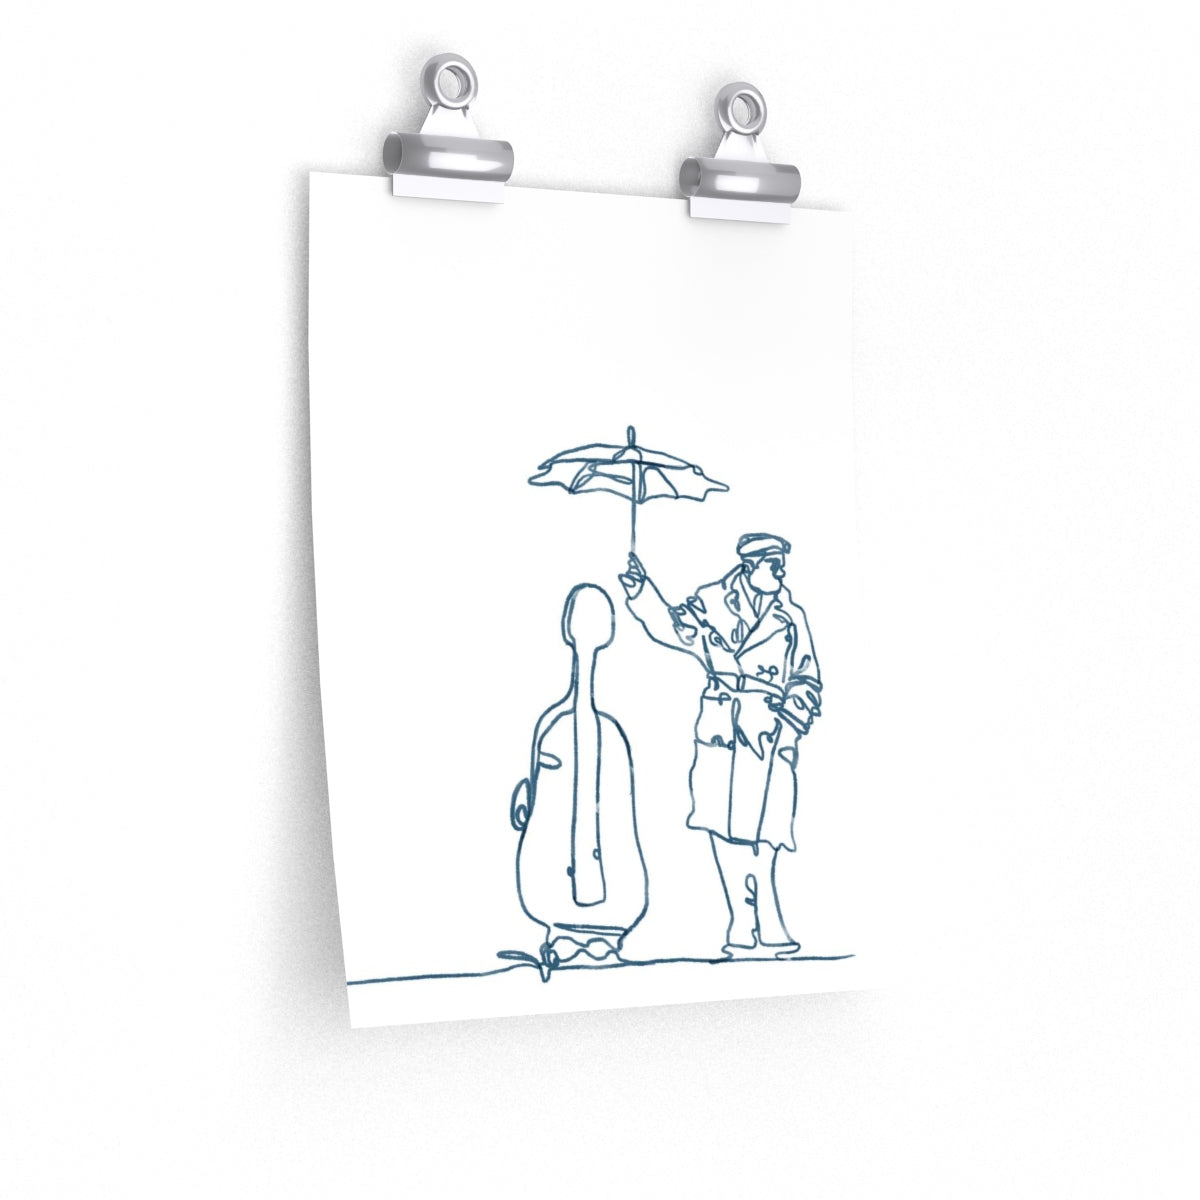 Man Holding An Umbrella For His Cello | Print | Poster | Premium Matte vertical posters - EGLOOP